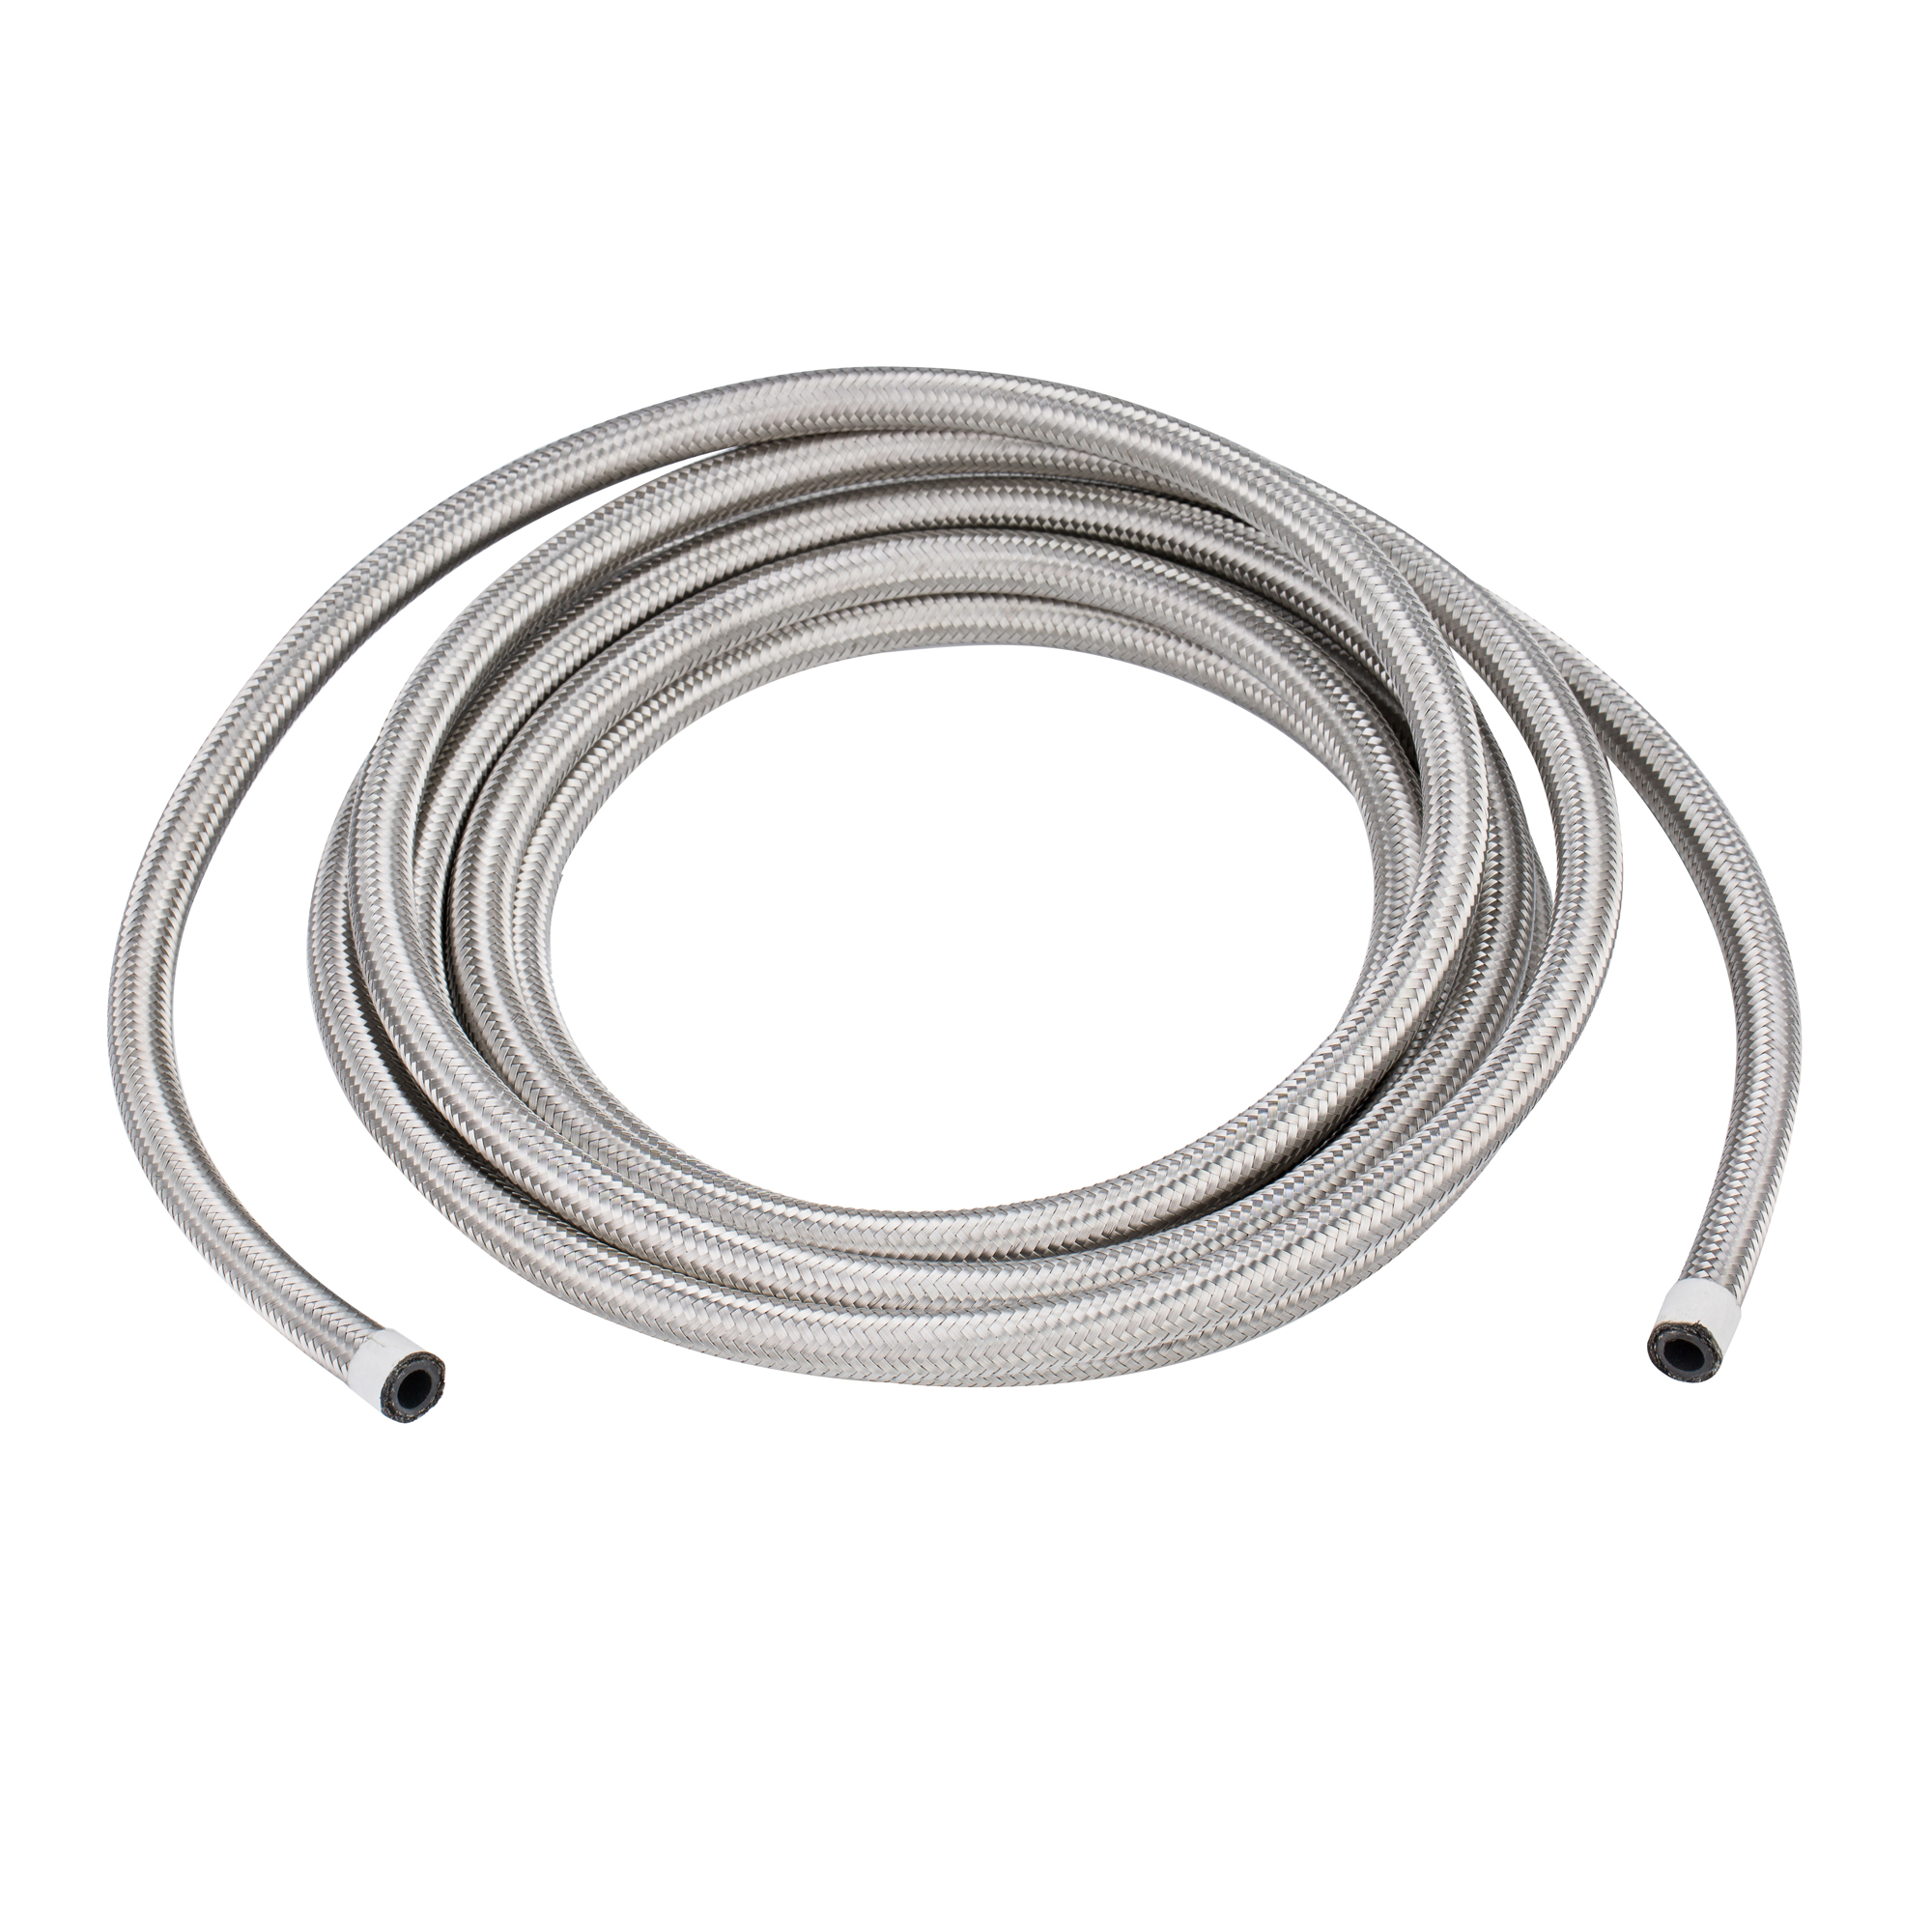 Stainless Steel Braided Rubber Fuel Hose Line Hose Rubber Flexible Rubber Hose Rubber Pressure Hose in AN3 to AN20